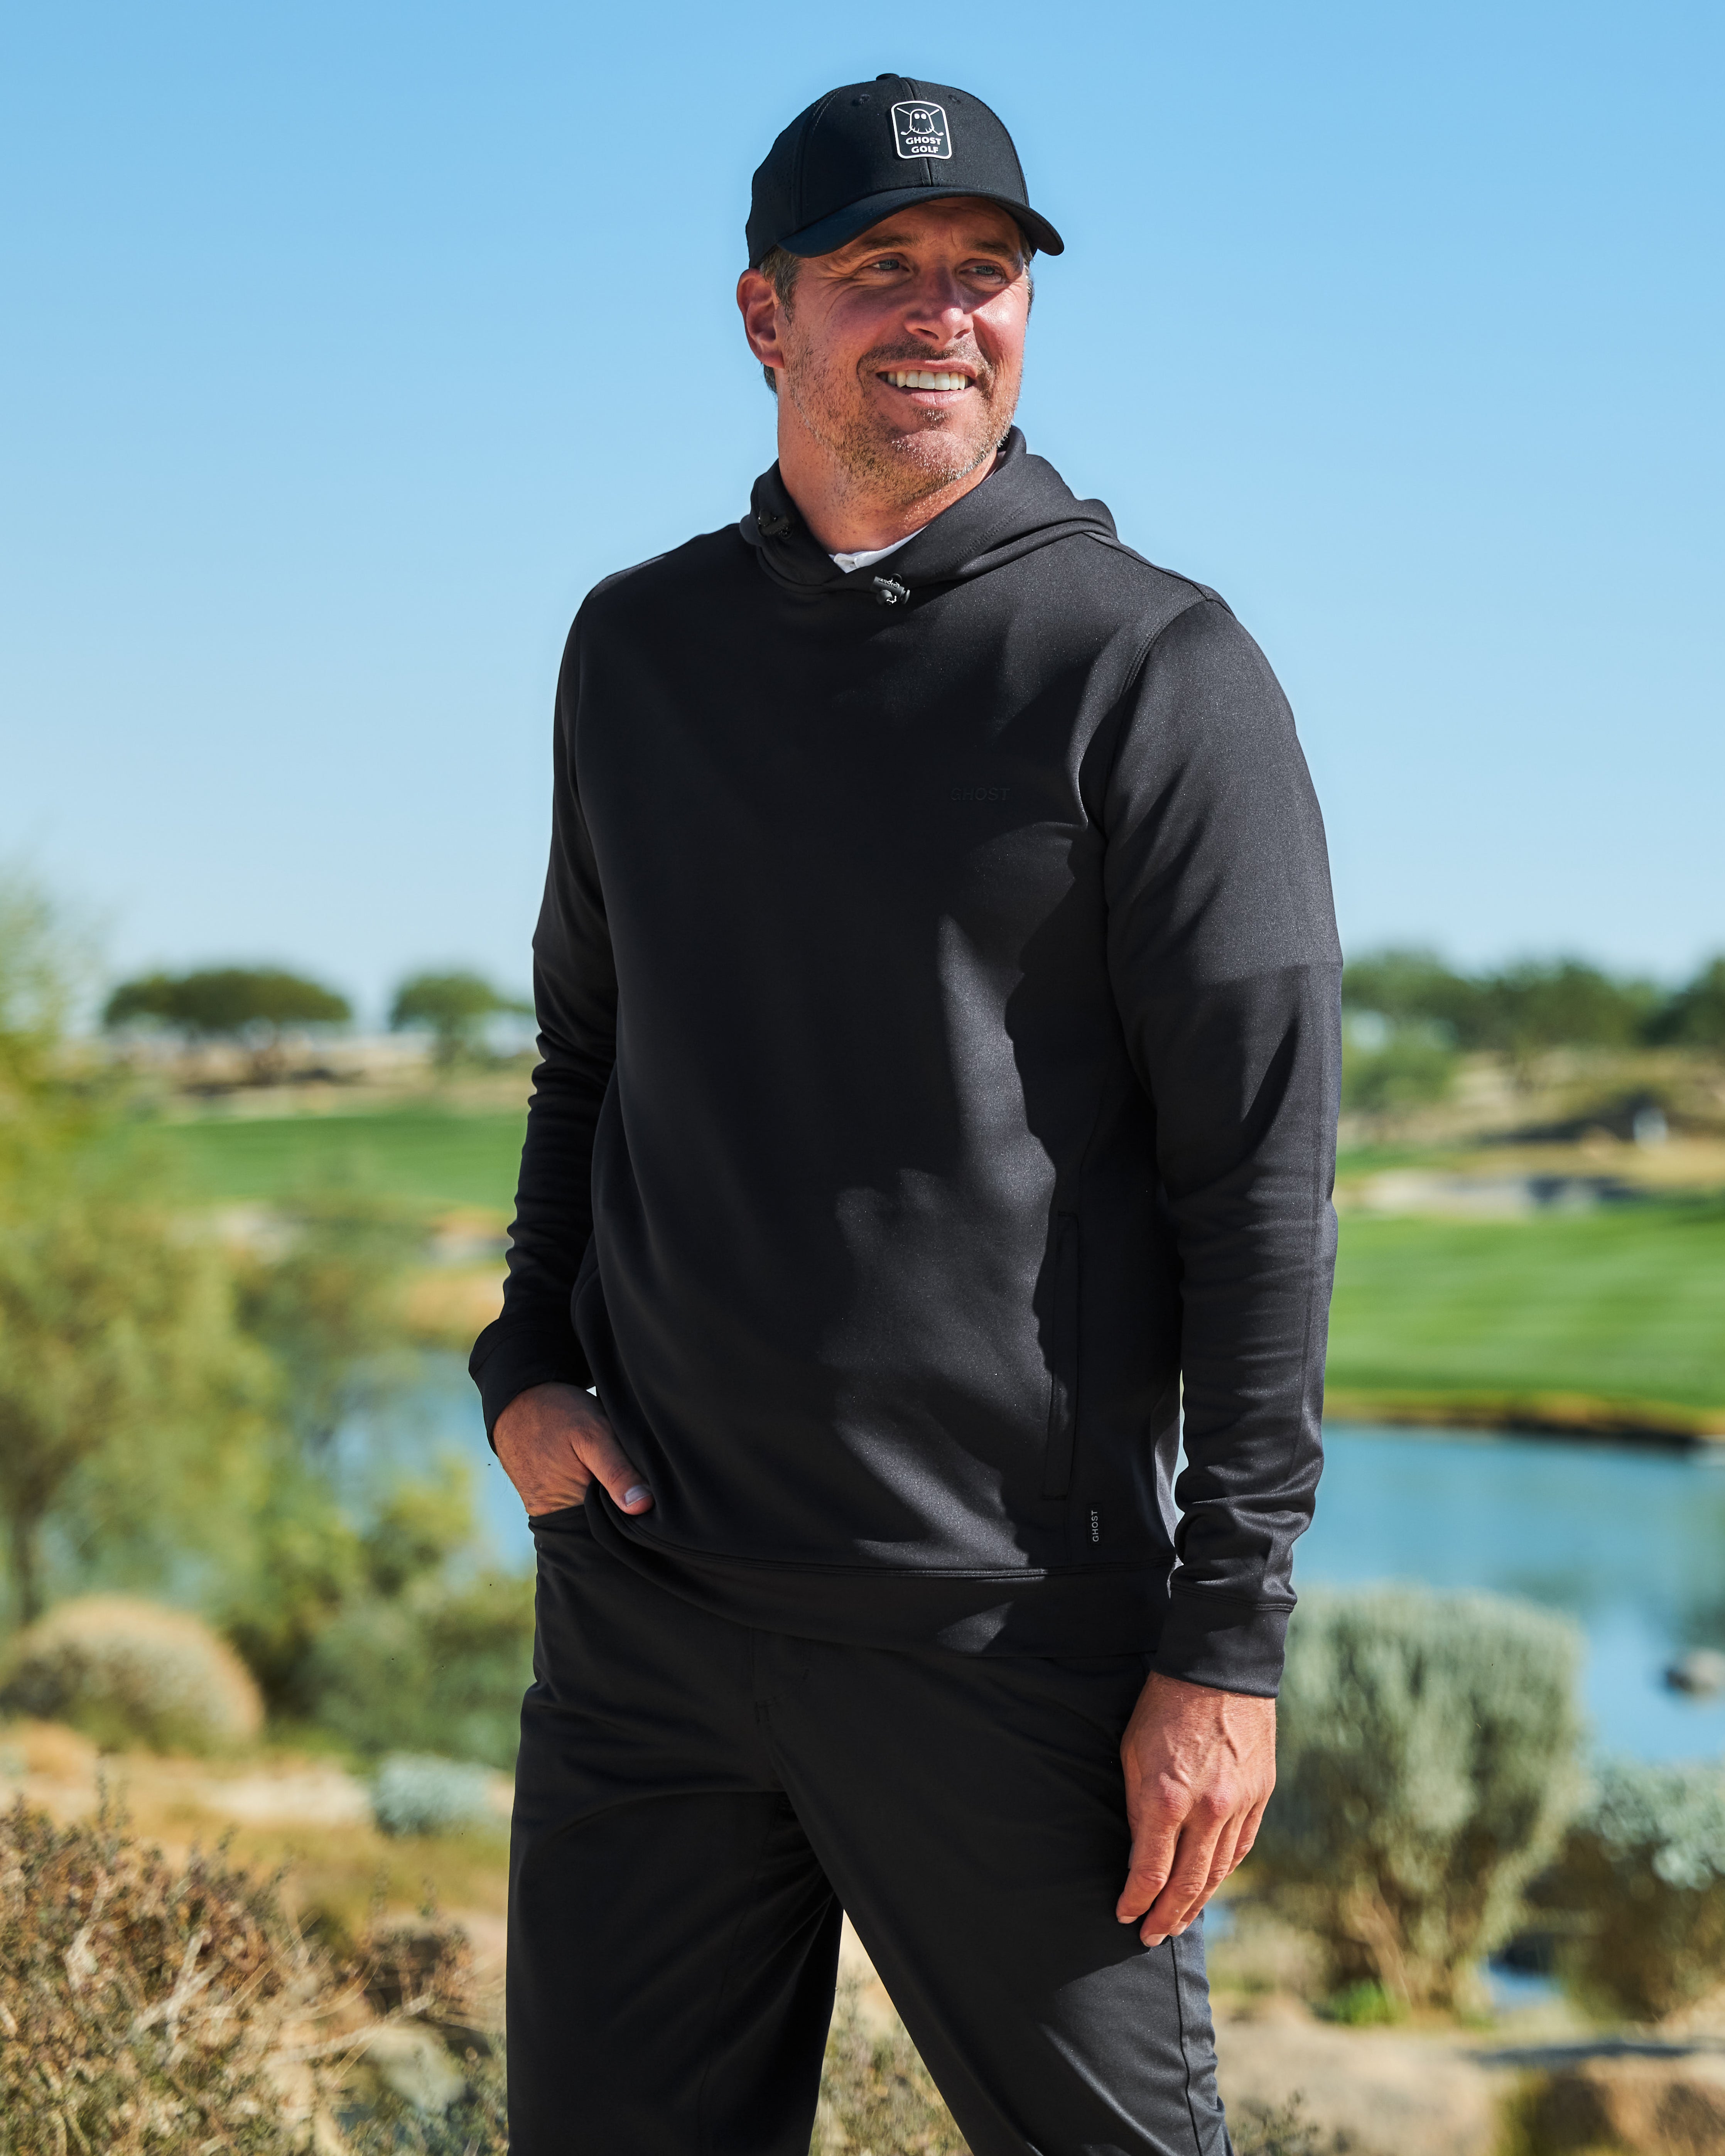 Men's Apparel Collection – Ghost Golf